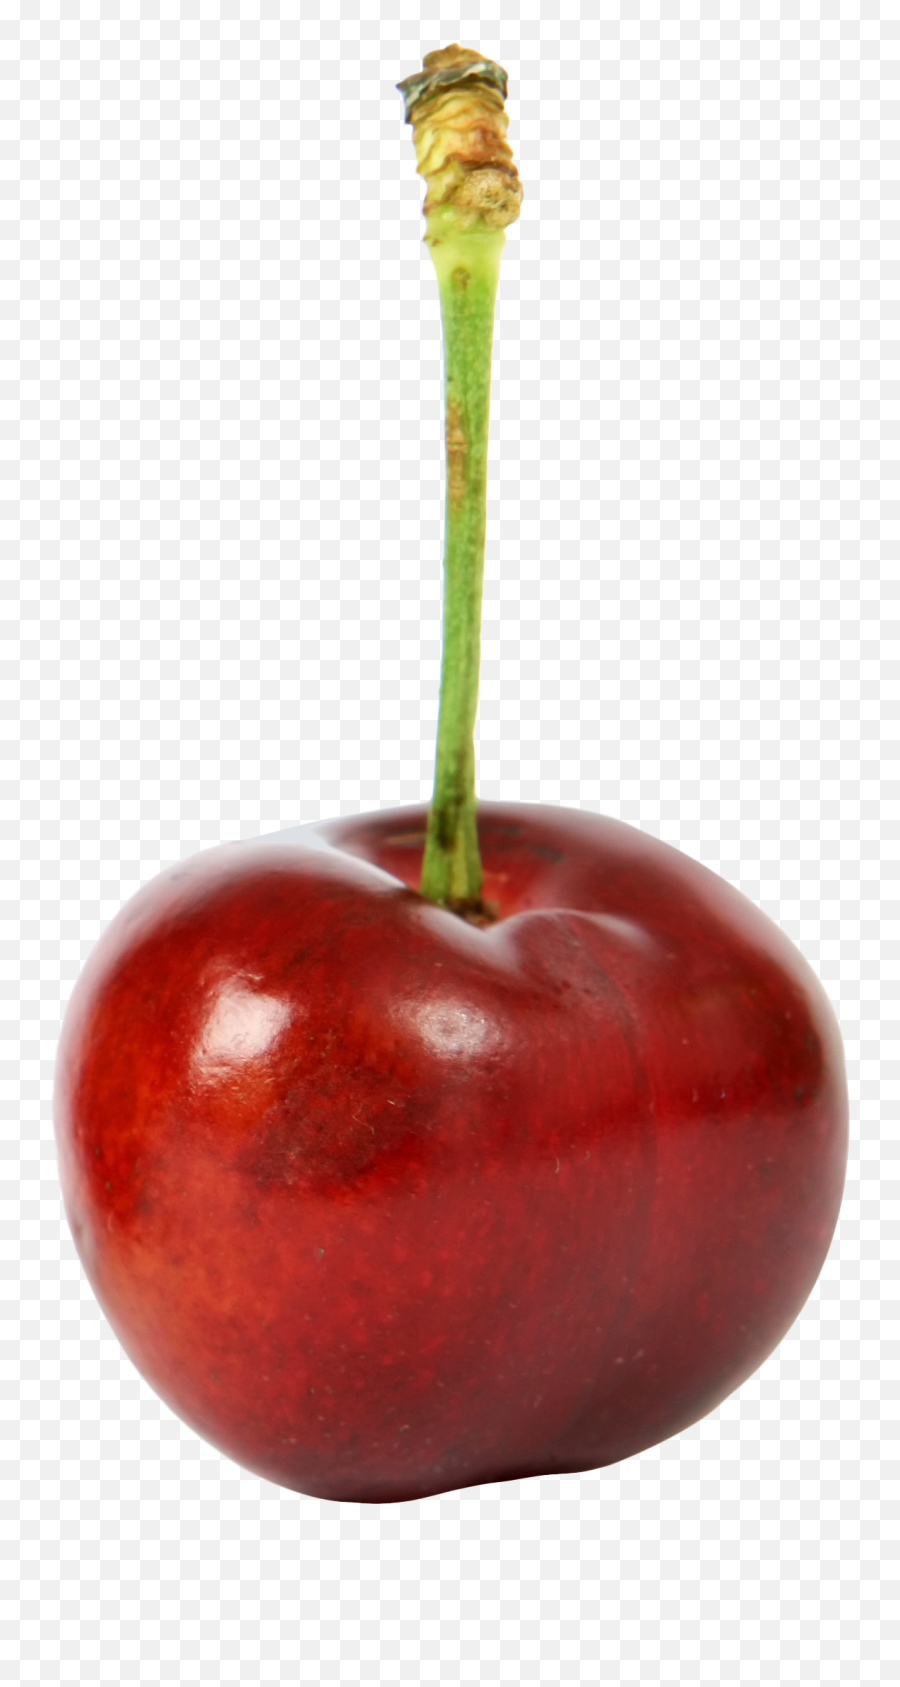 Sweet Ripe Cherry Png Image - Pngpix Strawberry And Cherry Colour,Sweet Png